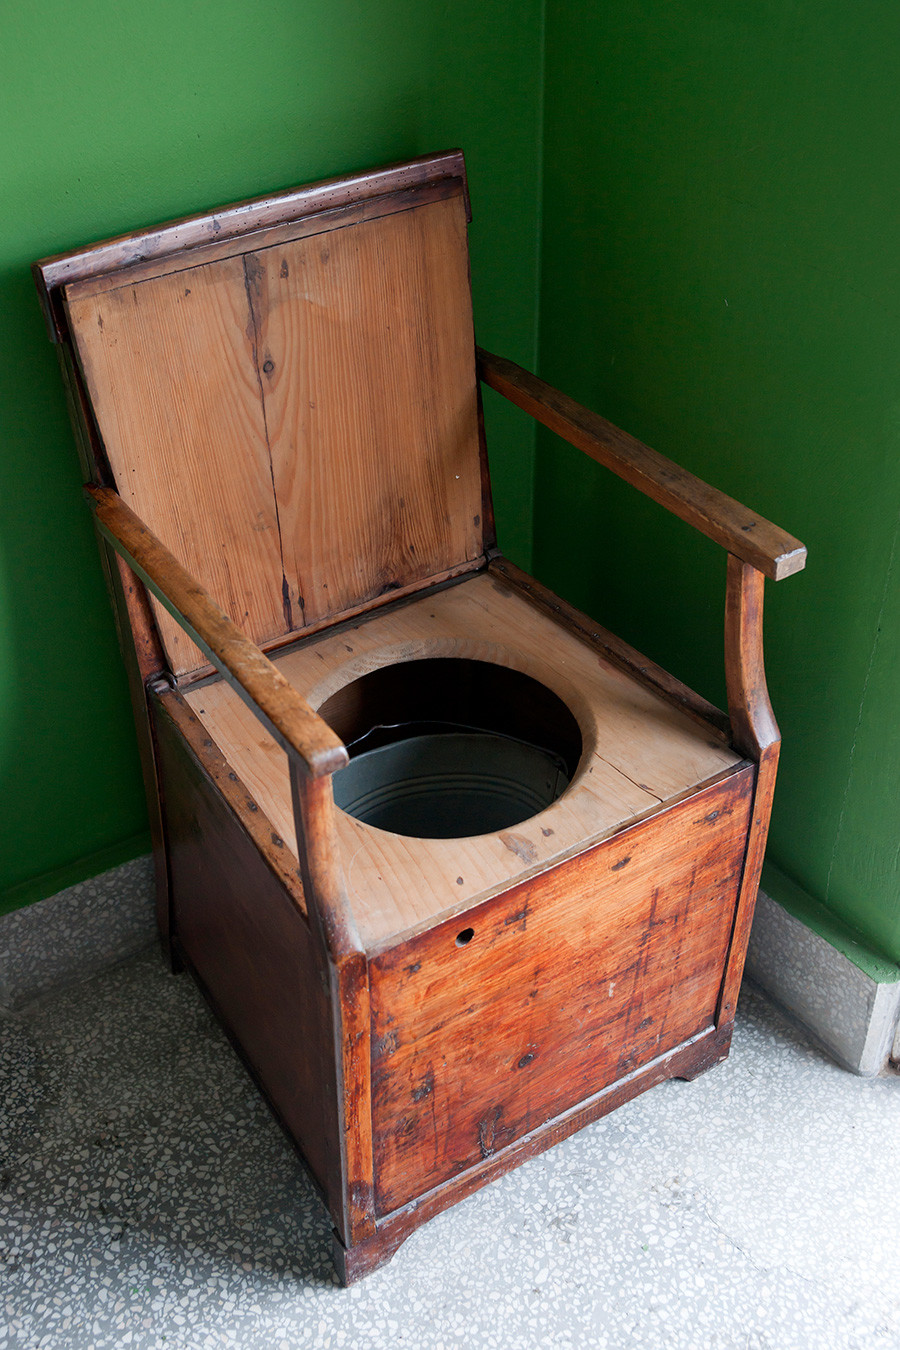 Vintage toilet made of wooden armchair and bucket.